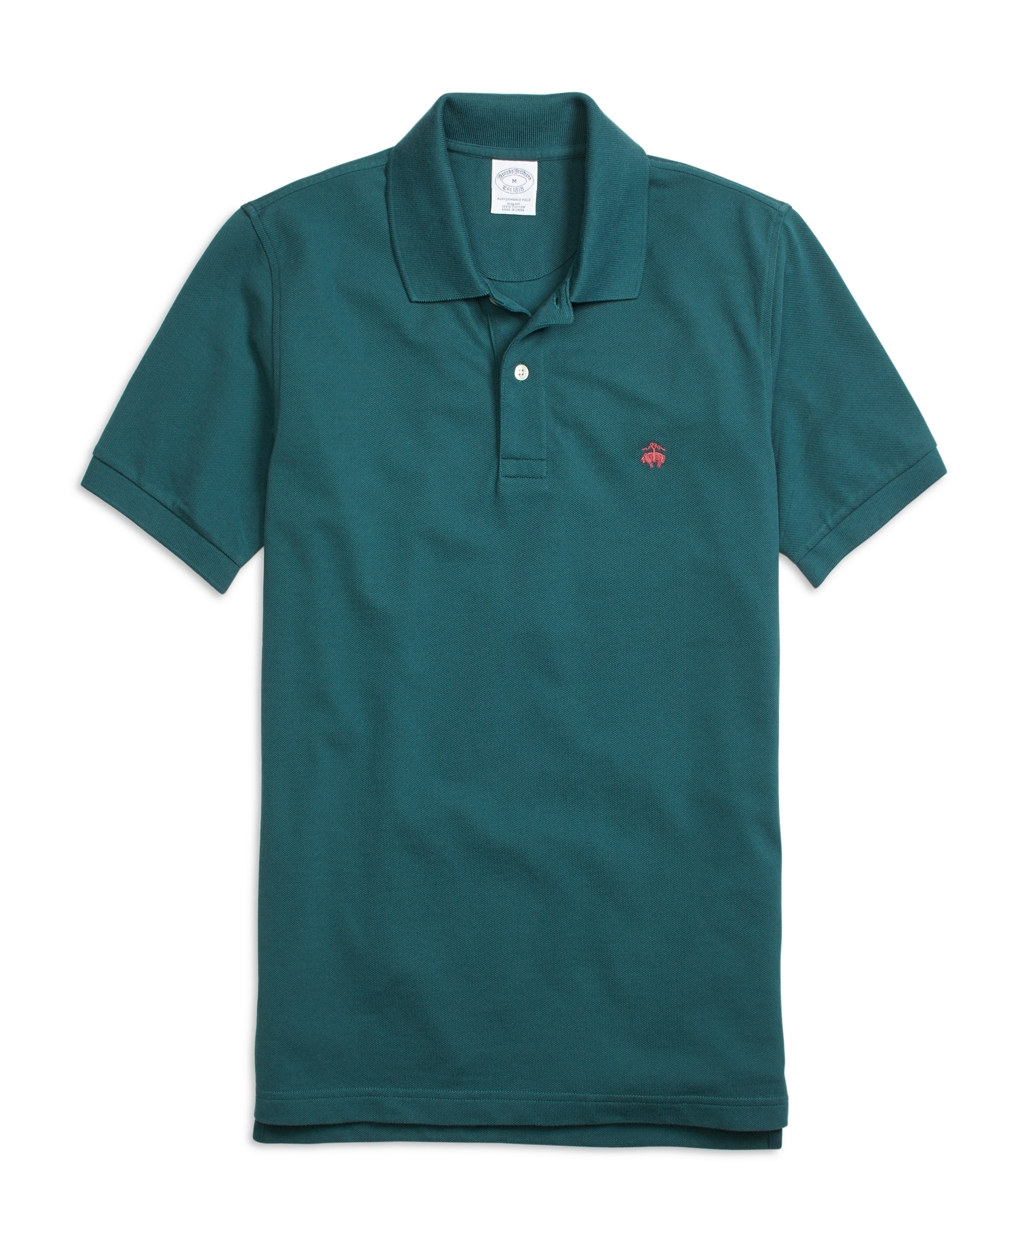 Brooks Brothers Golden Fleece® Slim Fit Performance Polo Shirt in Green ...